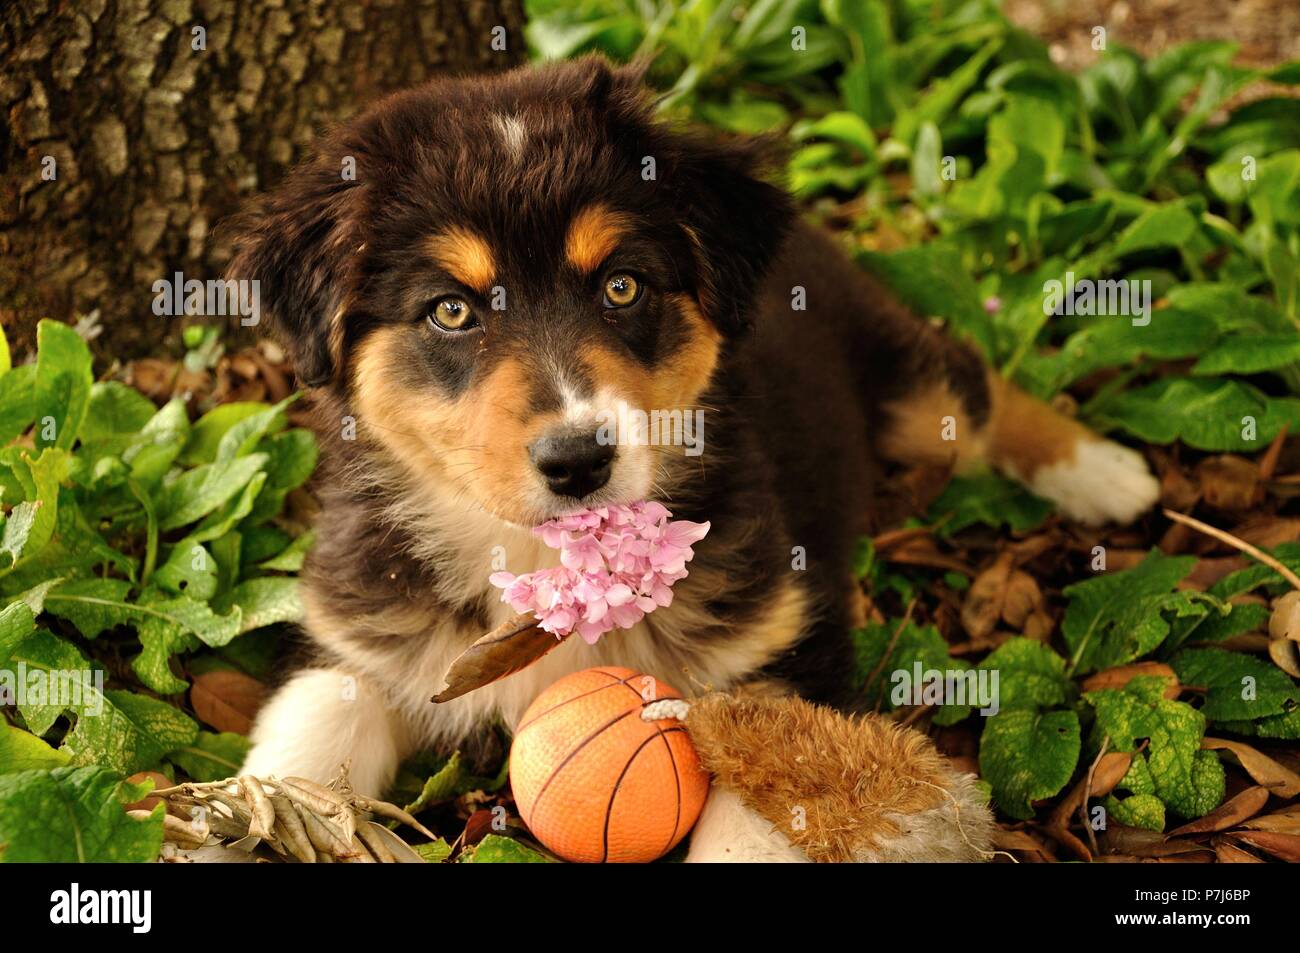 12269472 - puppy dog with pink flower Stock Photo